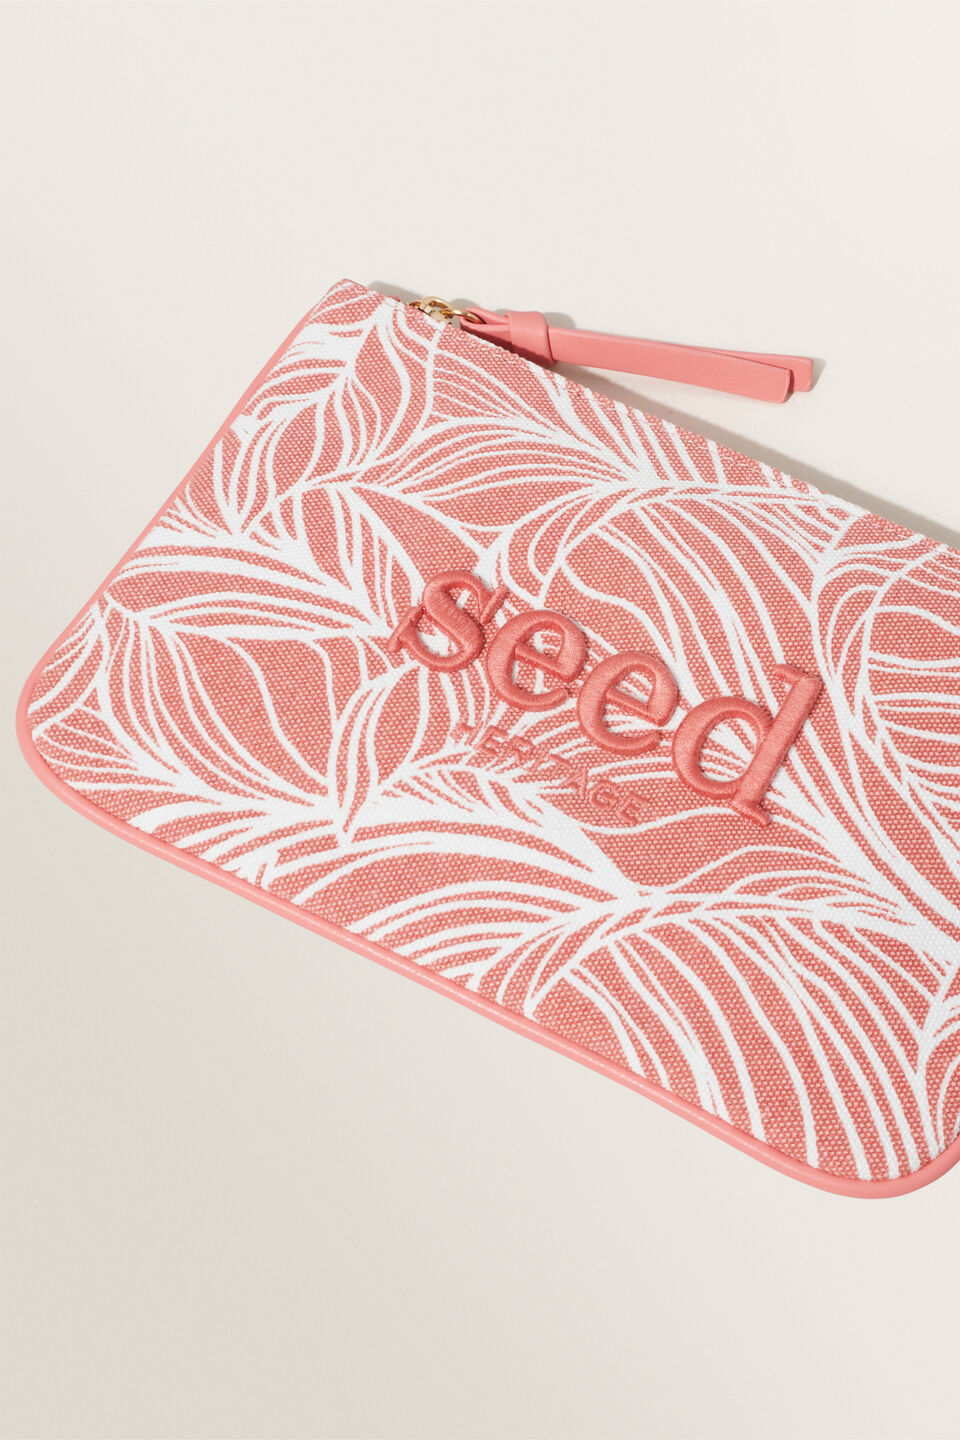 Seed Pouch  Coral Rose